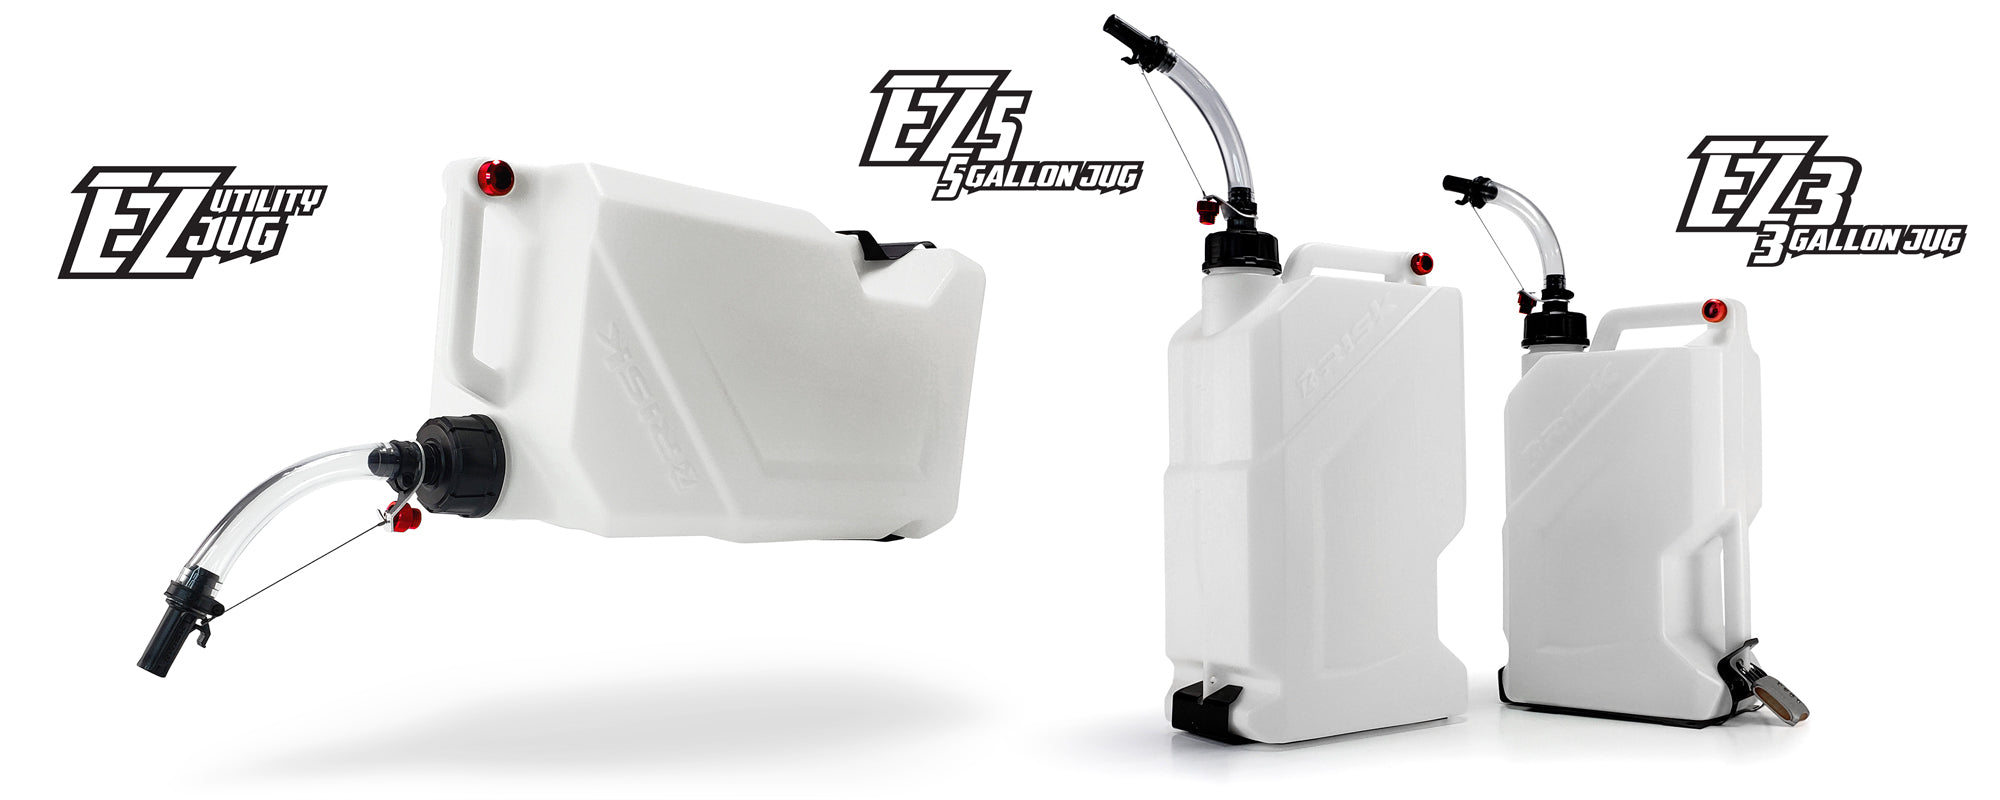 EZ Jugs homepage banner featuring the EZ5 5 gallon jug and EZ3 3 gallon jug. Another jug on its side in a pouring pose.